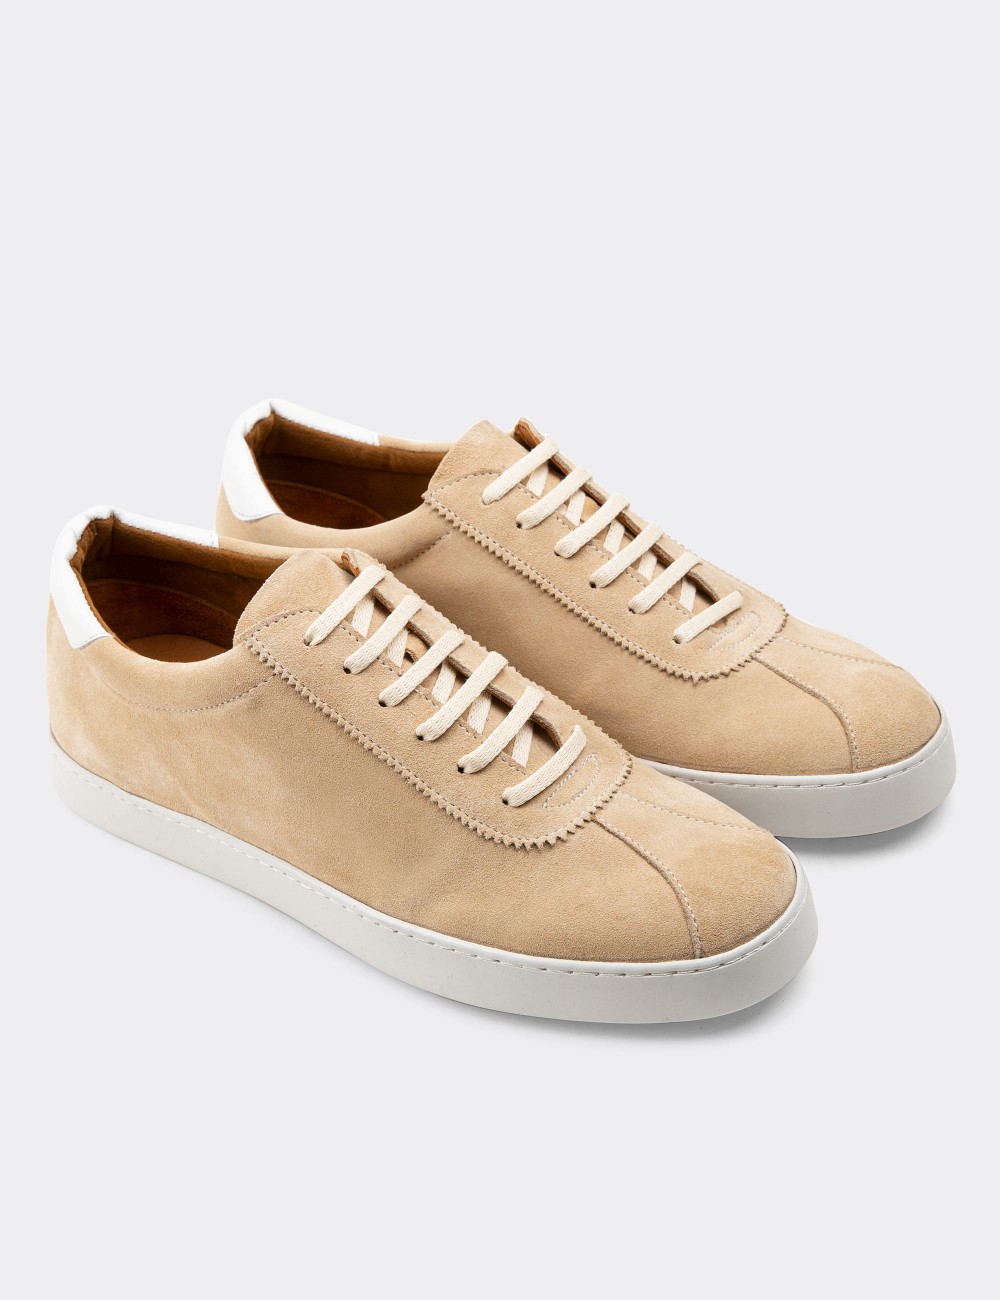 Beige Suede Leather Sneakers - 01885MBEJC01